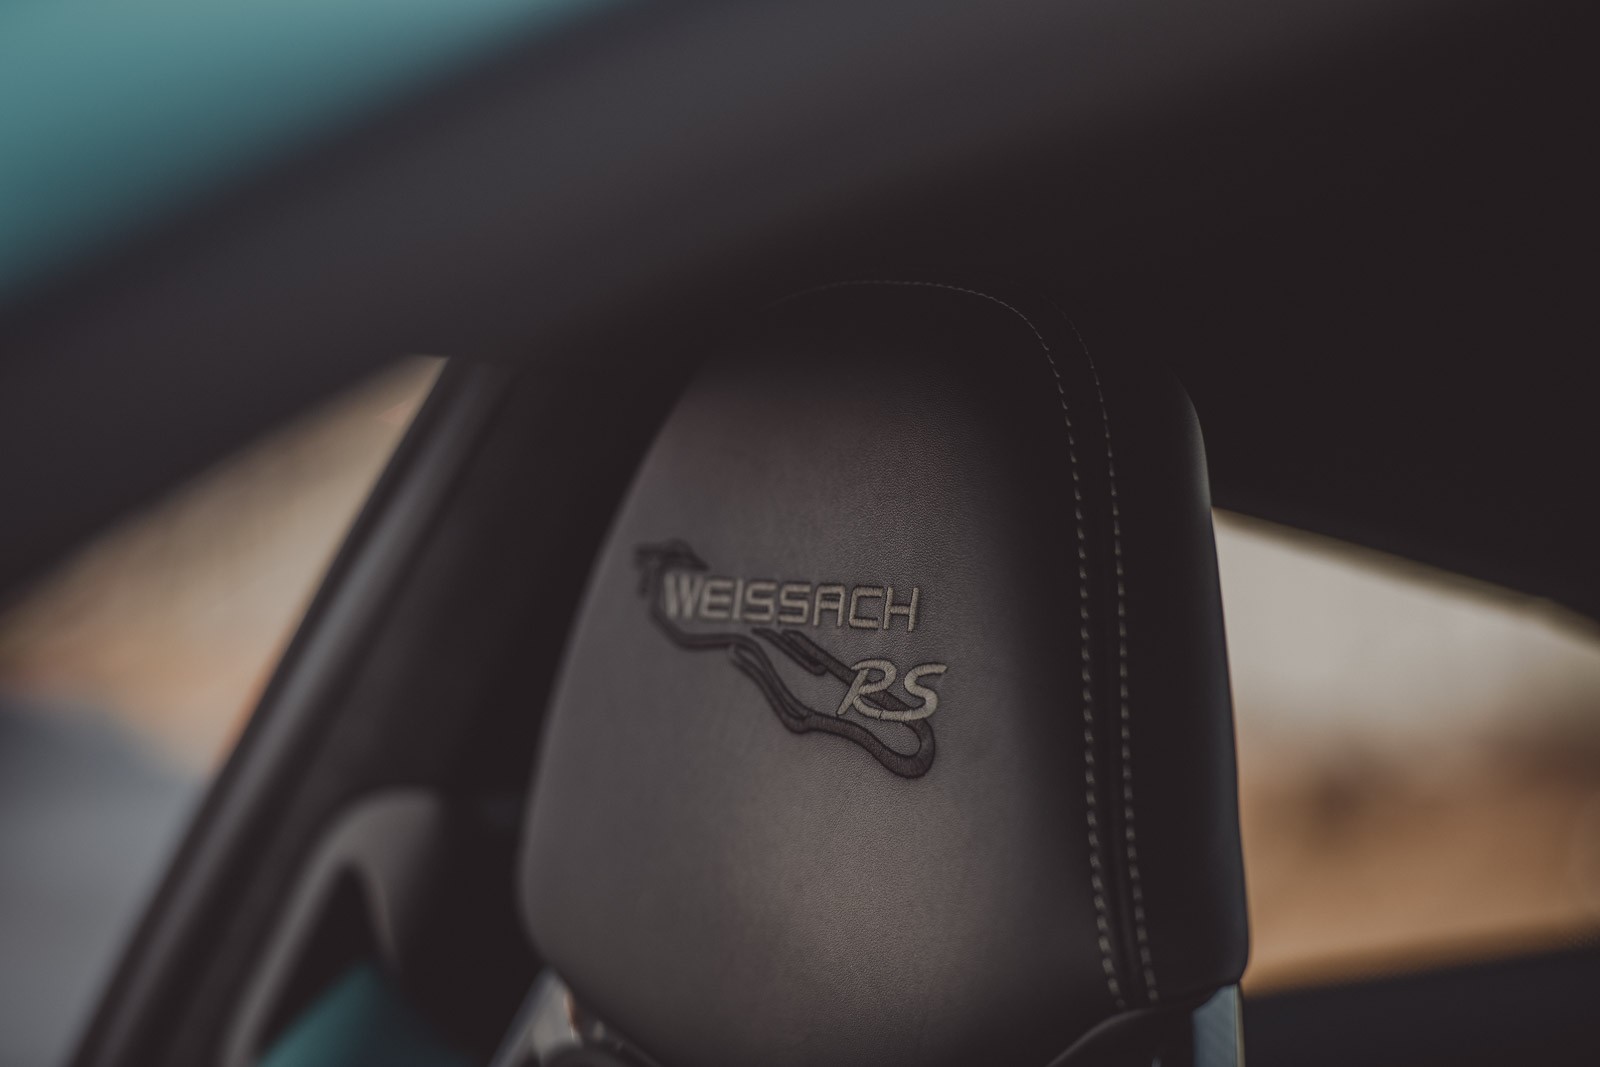 GT3 RS Weissach edition embroidered headrest